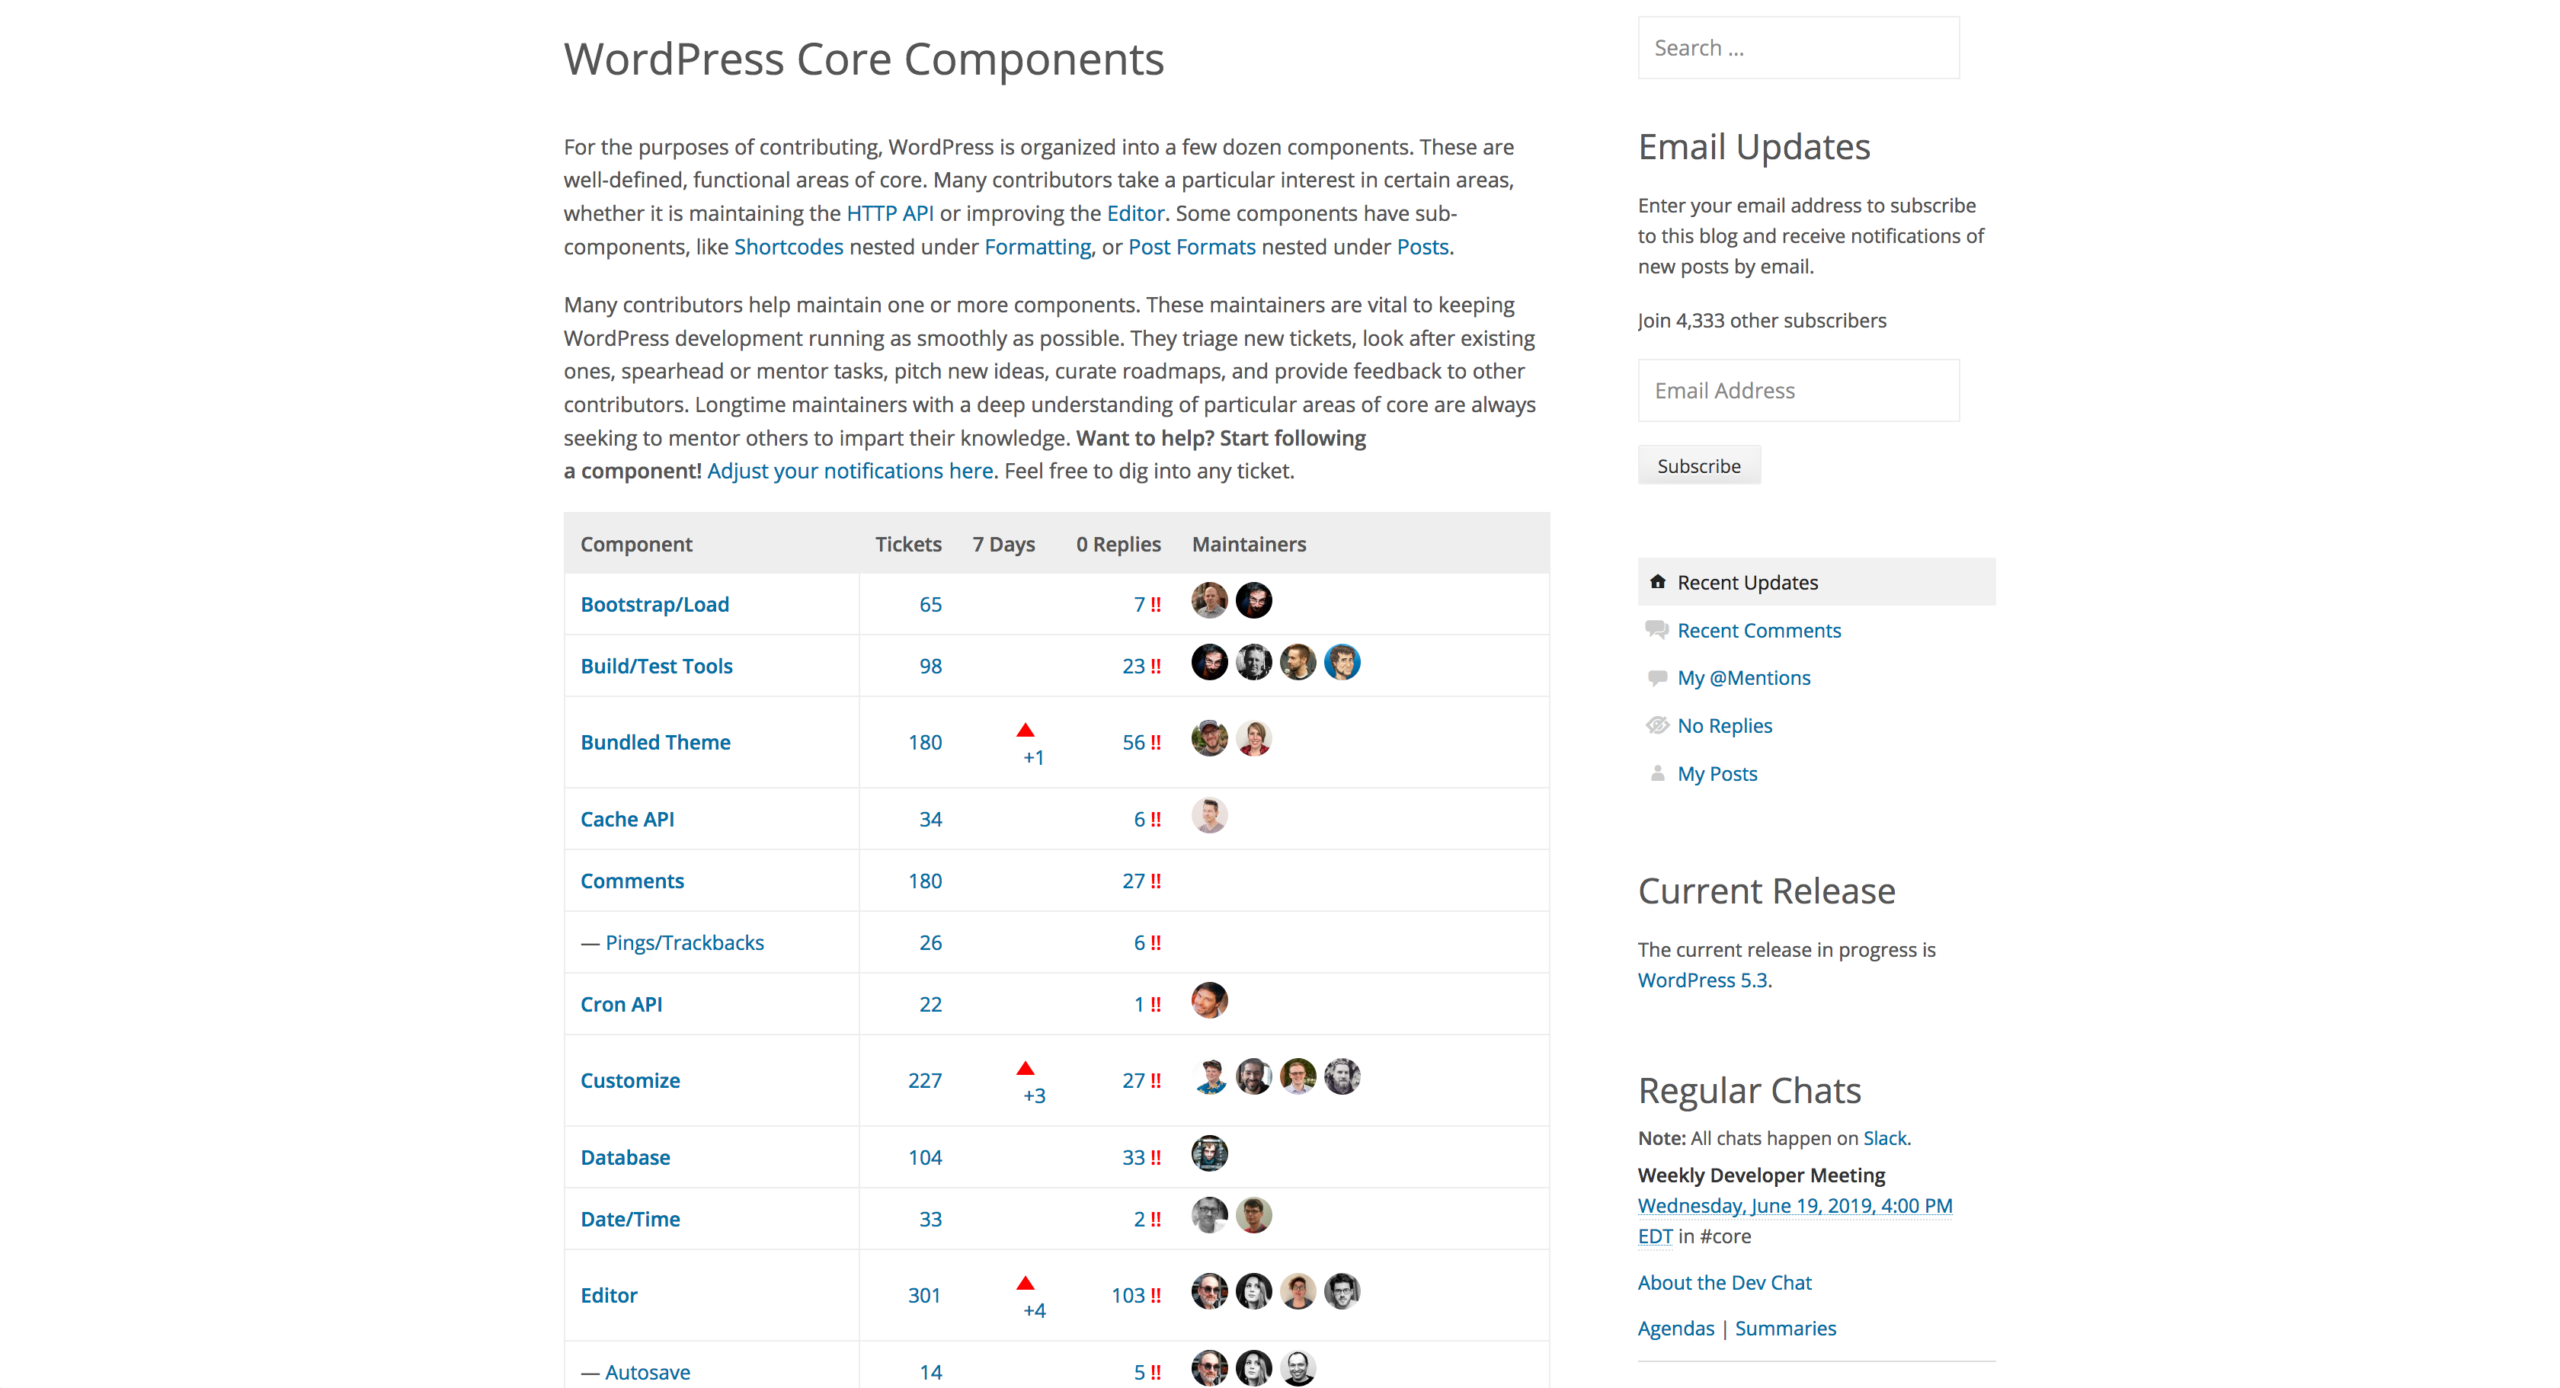 A screenshot of the WordPress Core Components page at https://make.wordpress.org/core/Components/, which shows the number of open tickets, number of unanswered tickets, and 7 day velocity for each component.